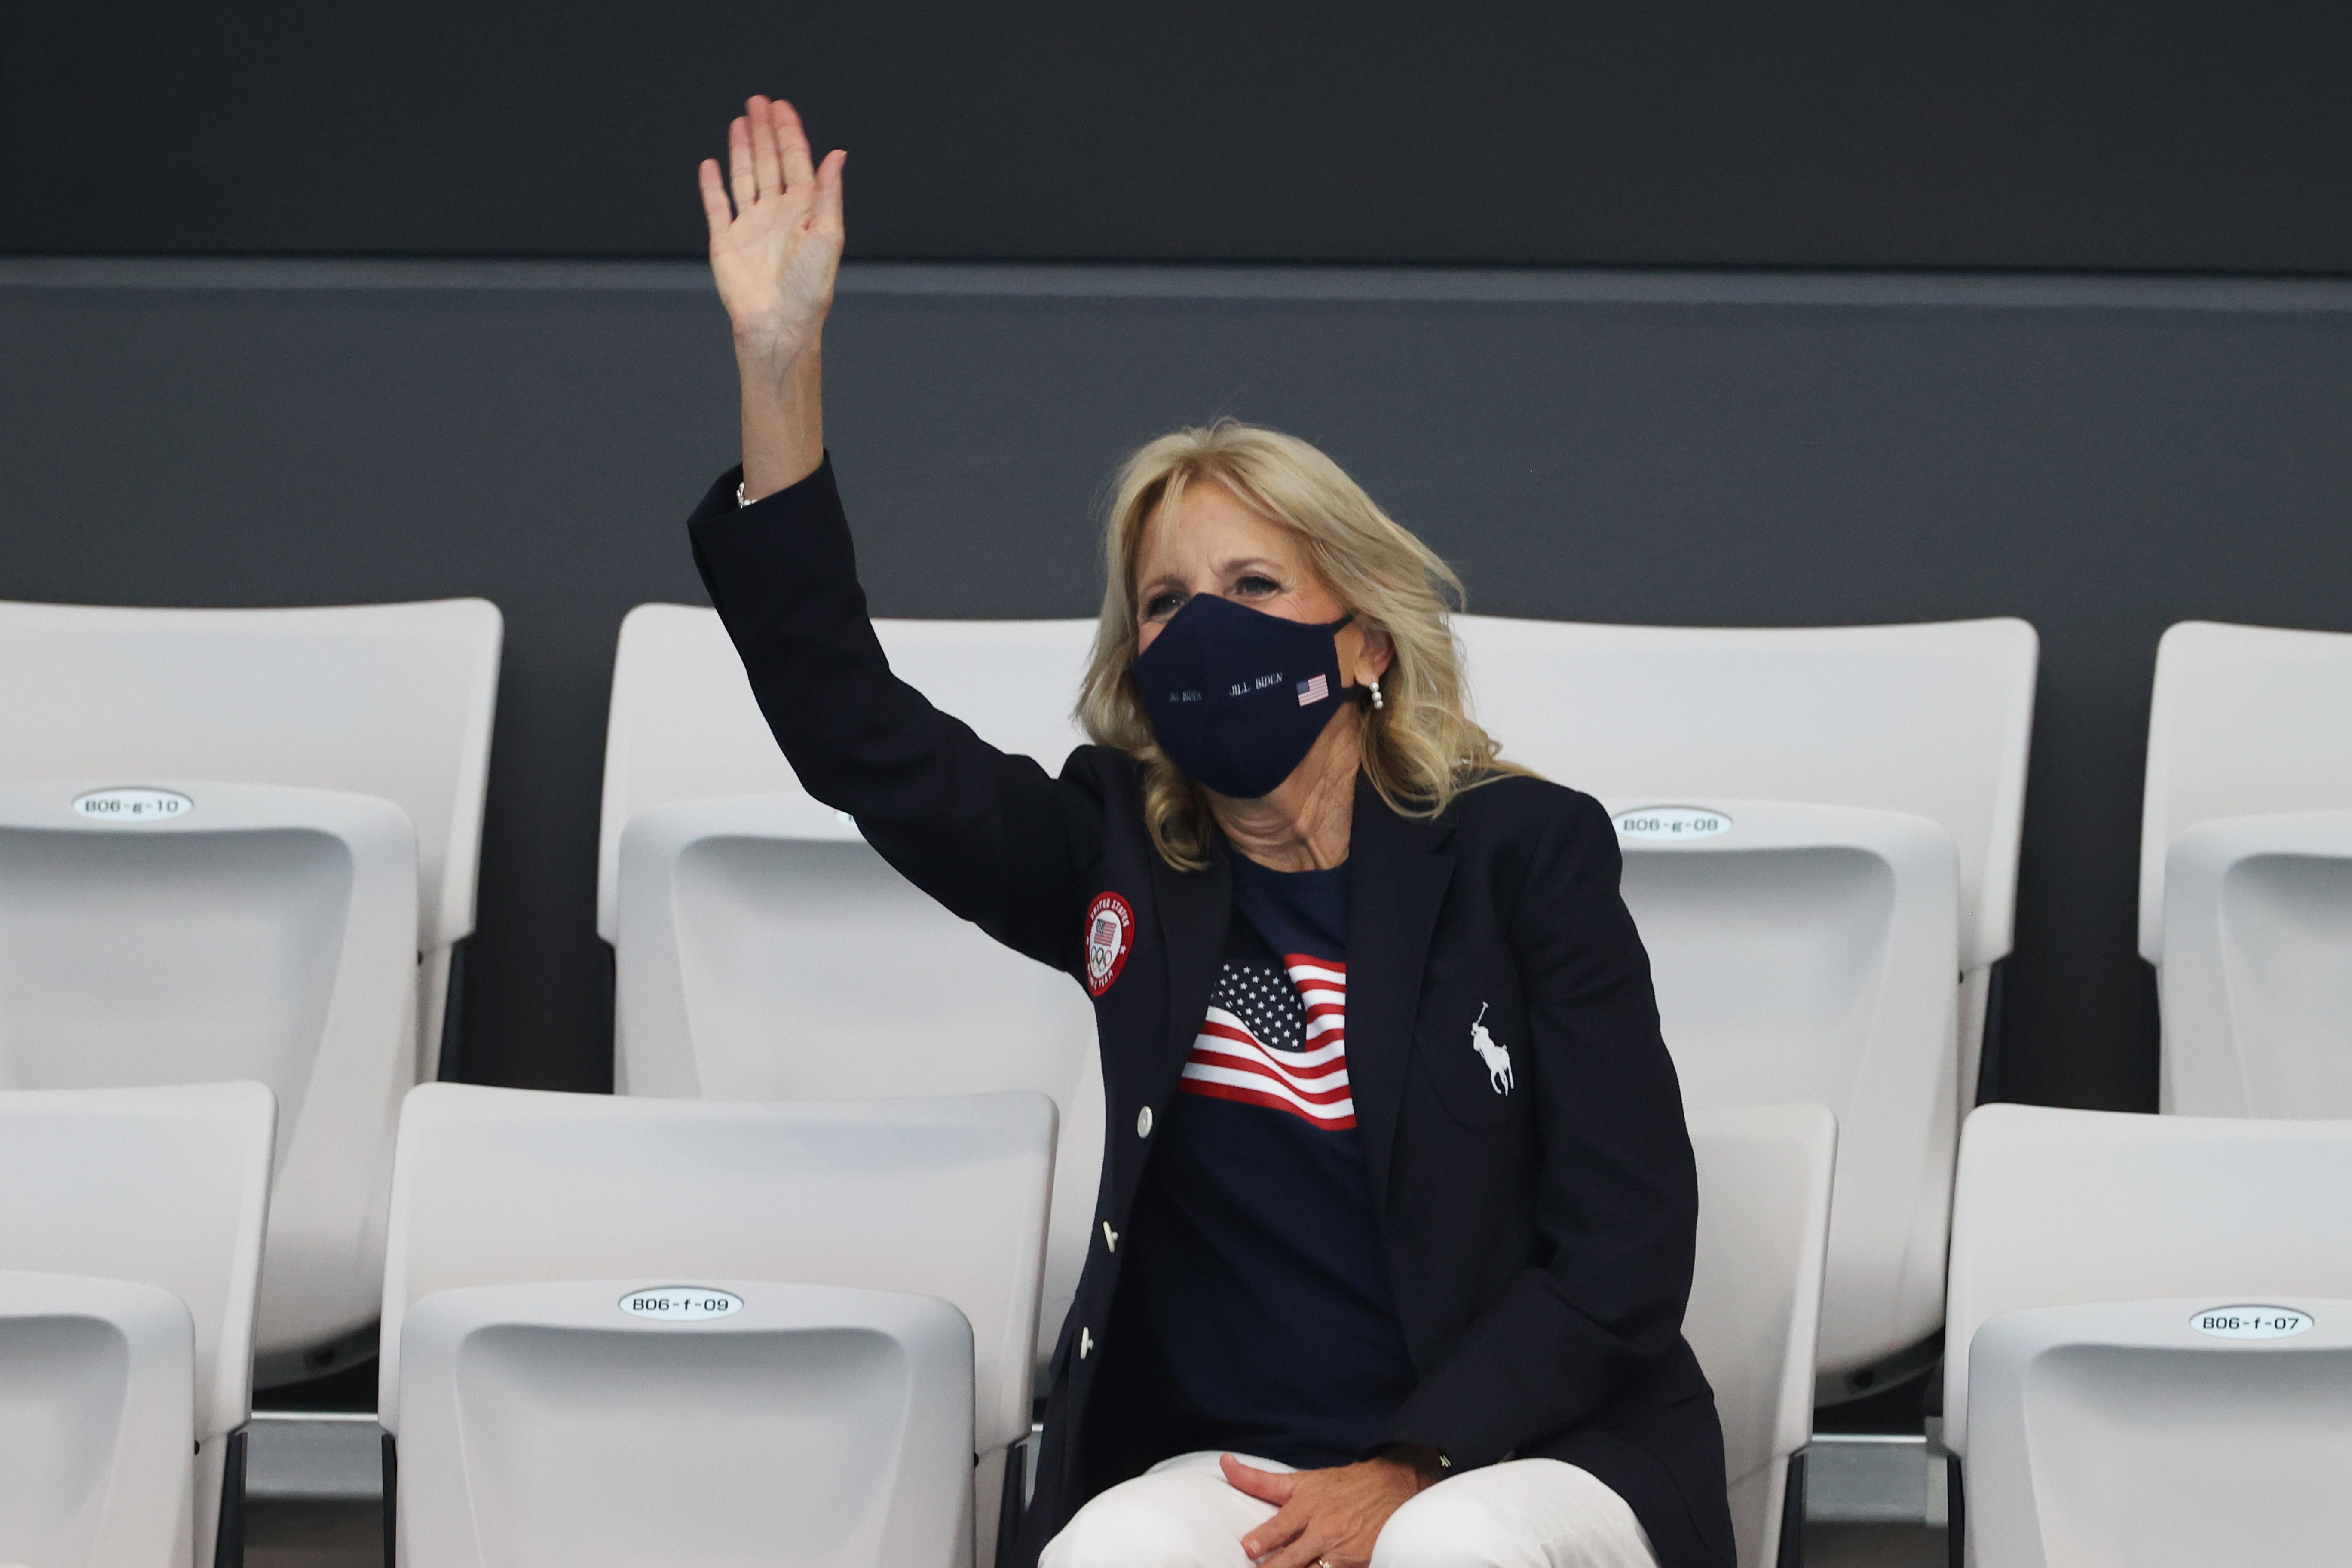 Biden wears the Ralph Lauren navy jacket and trousers that are part of the official US Olympic Team uniform to the Tokyo Aquatics Centre